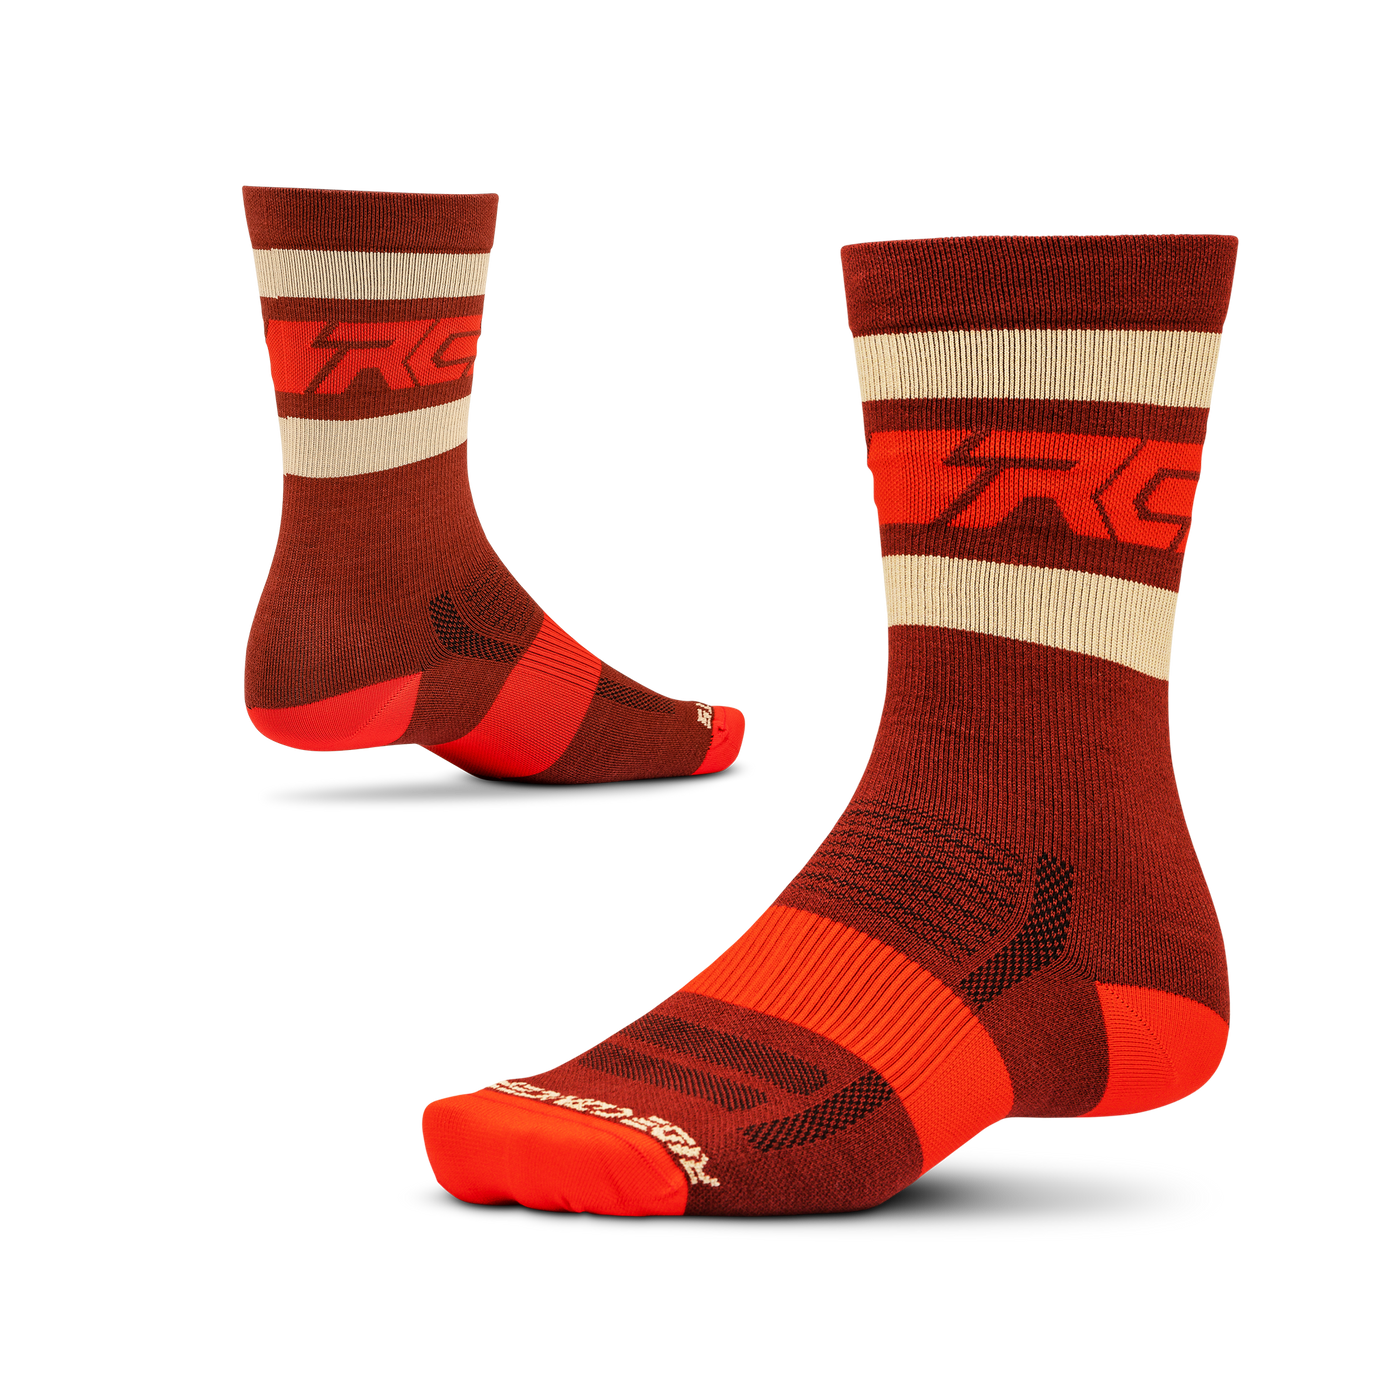 Ride Concepts FiftyFifty MTB Sock - Wool 8" - Oxblood